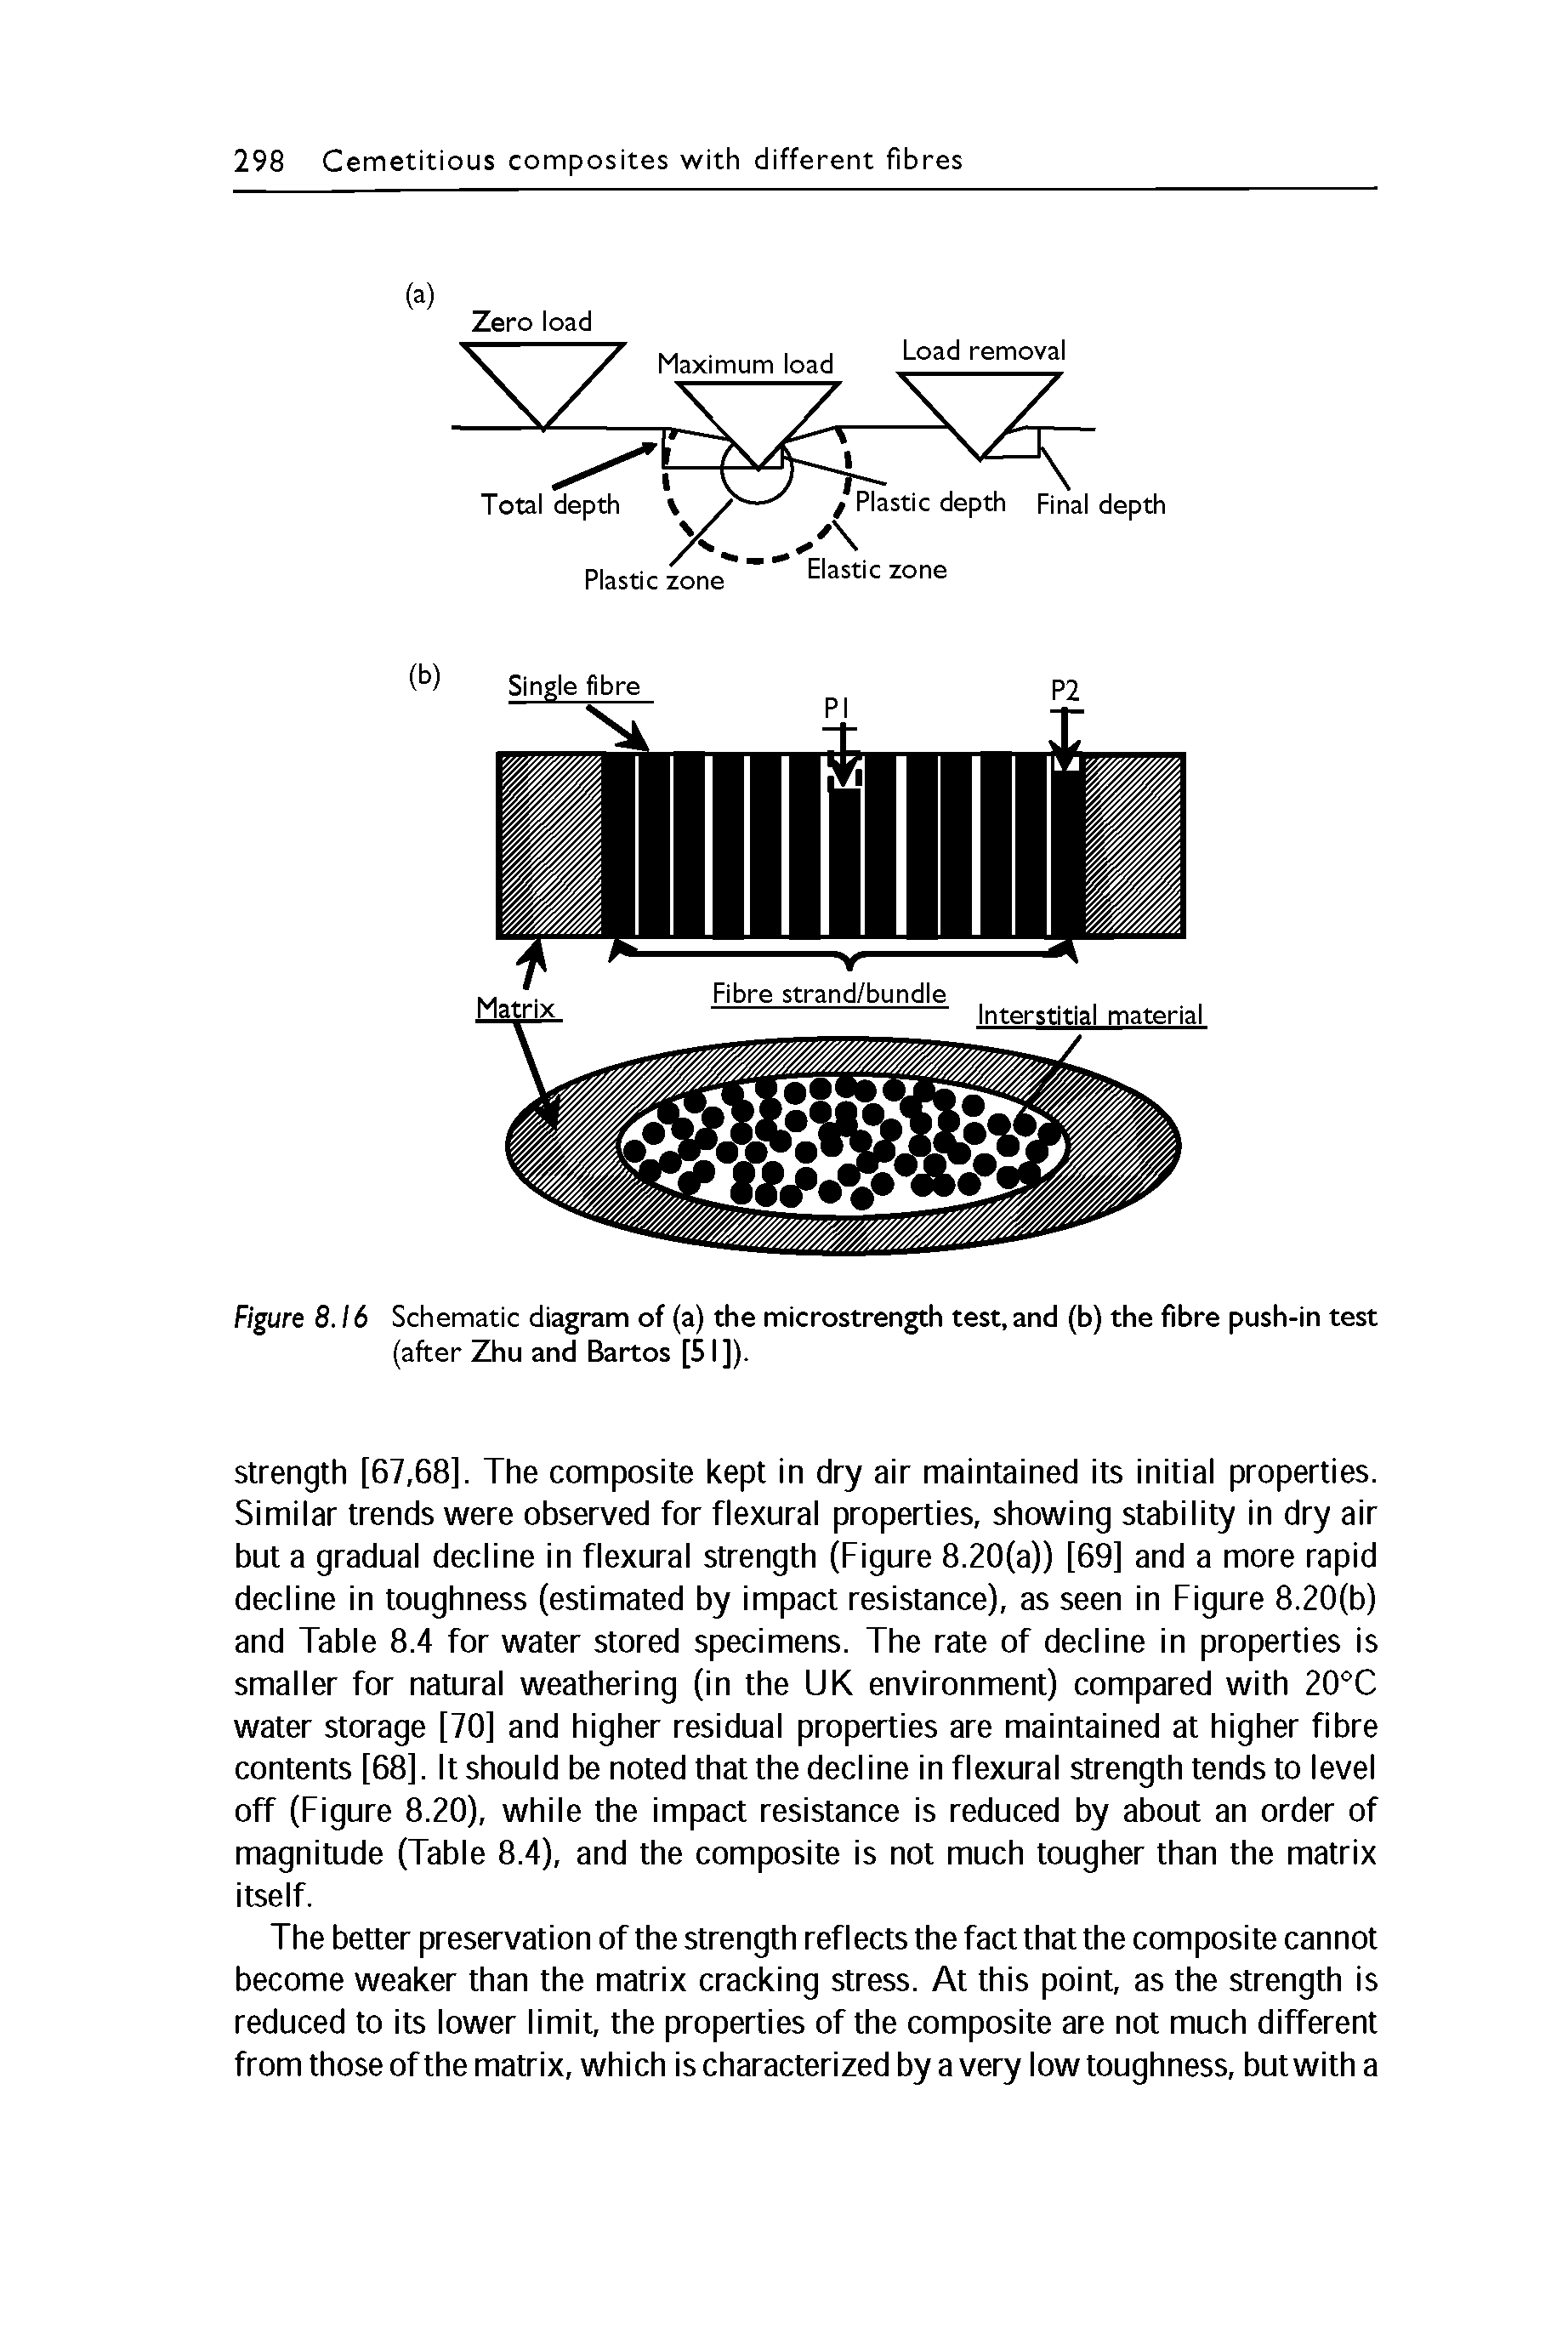 Figure 8.16 Schematic diagram of (a) the microstrength test, and (b) the fibre push-in test (after Zhu and Bartos [51]).